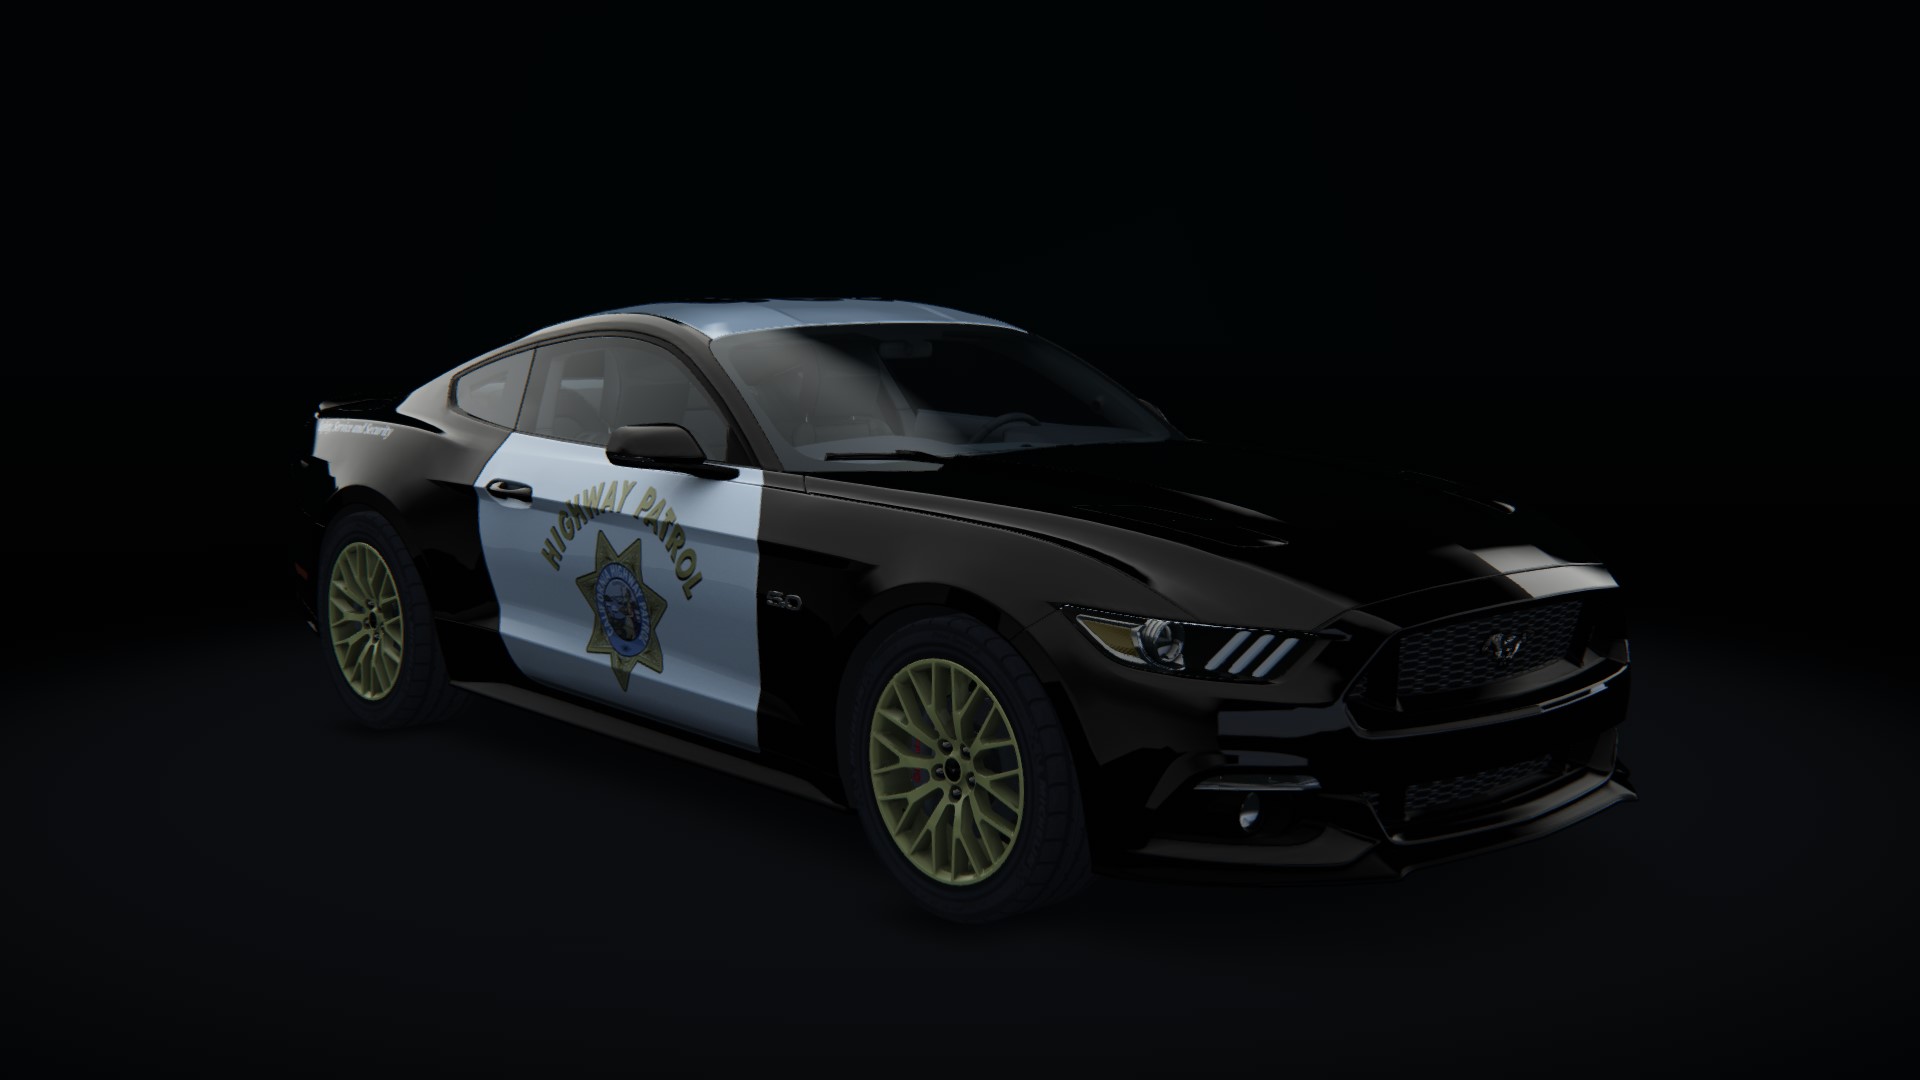 Ford Mustang 2015, skin chp_unit_329